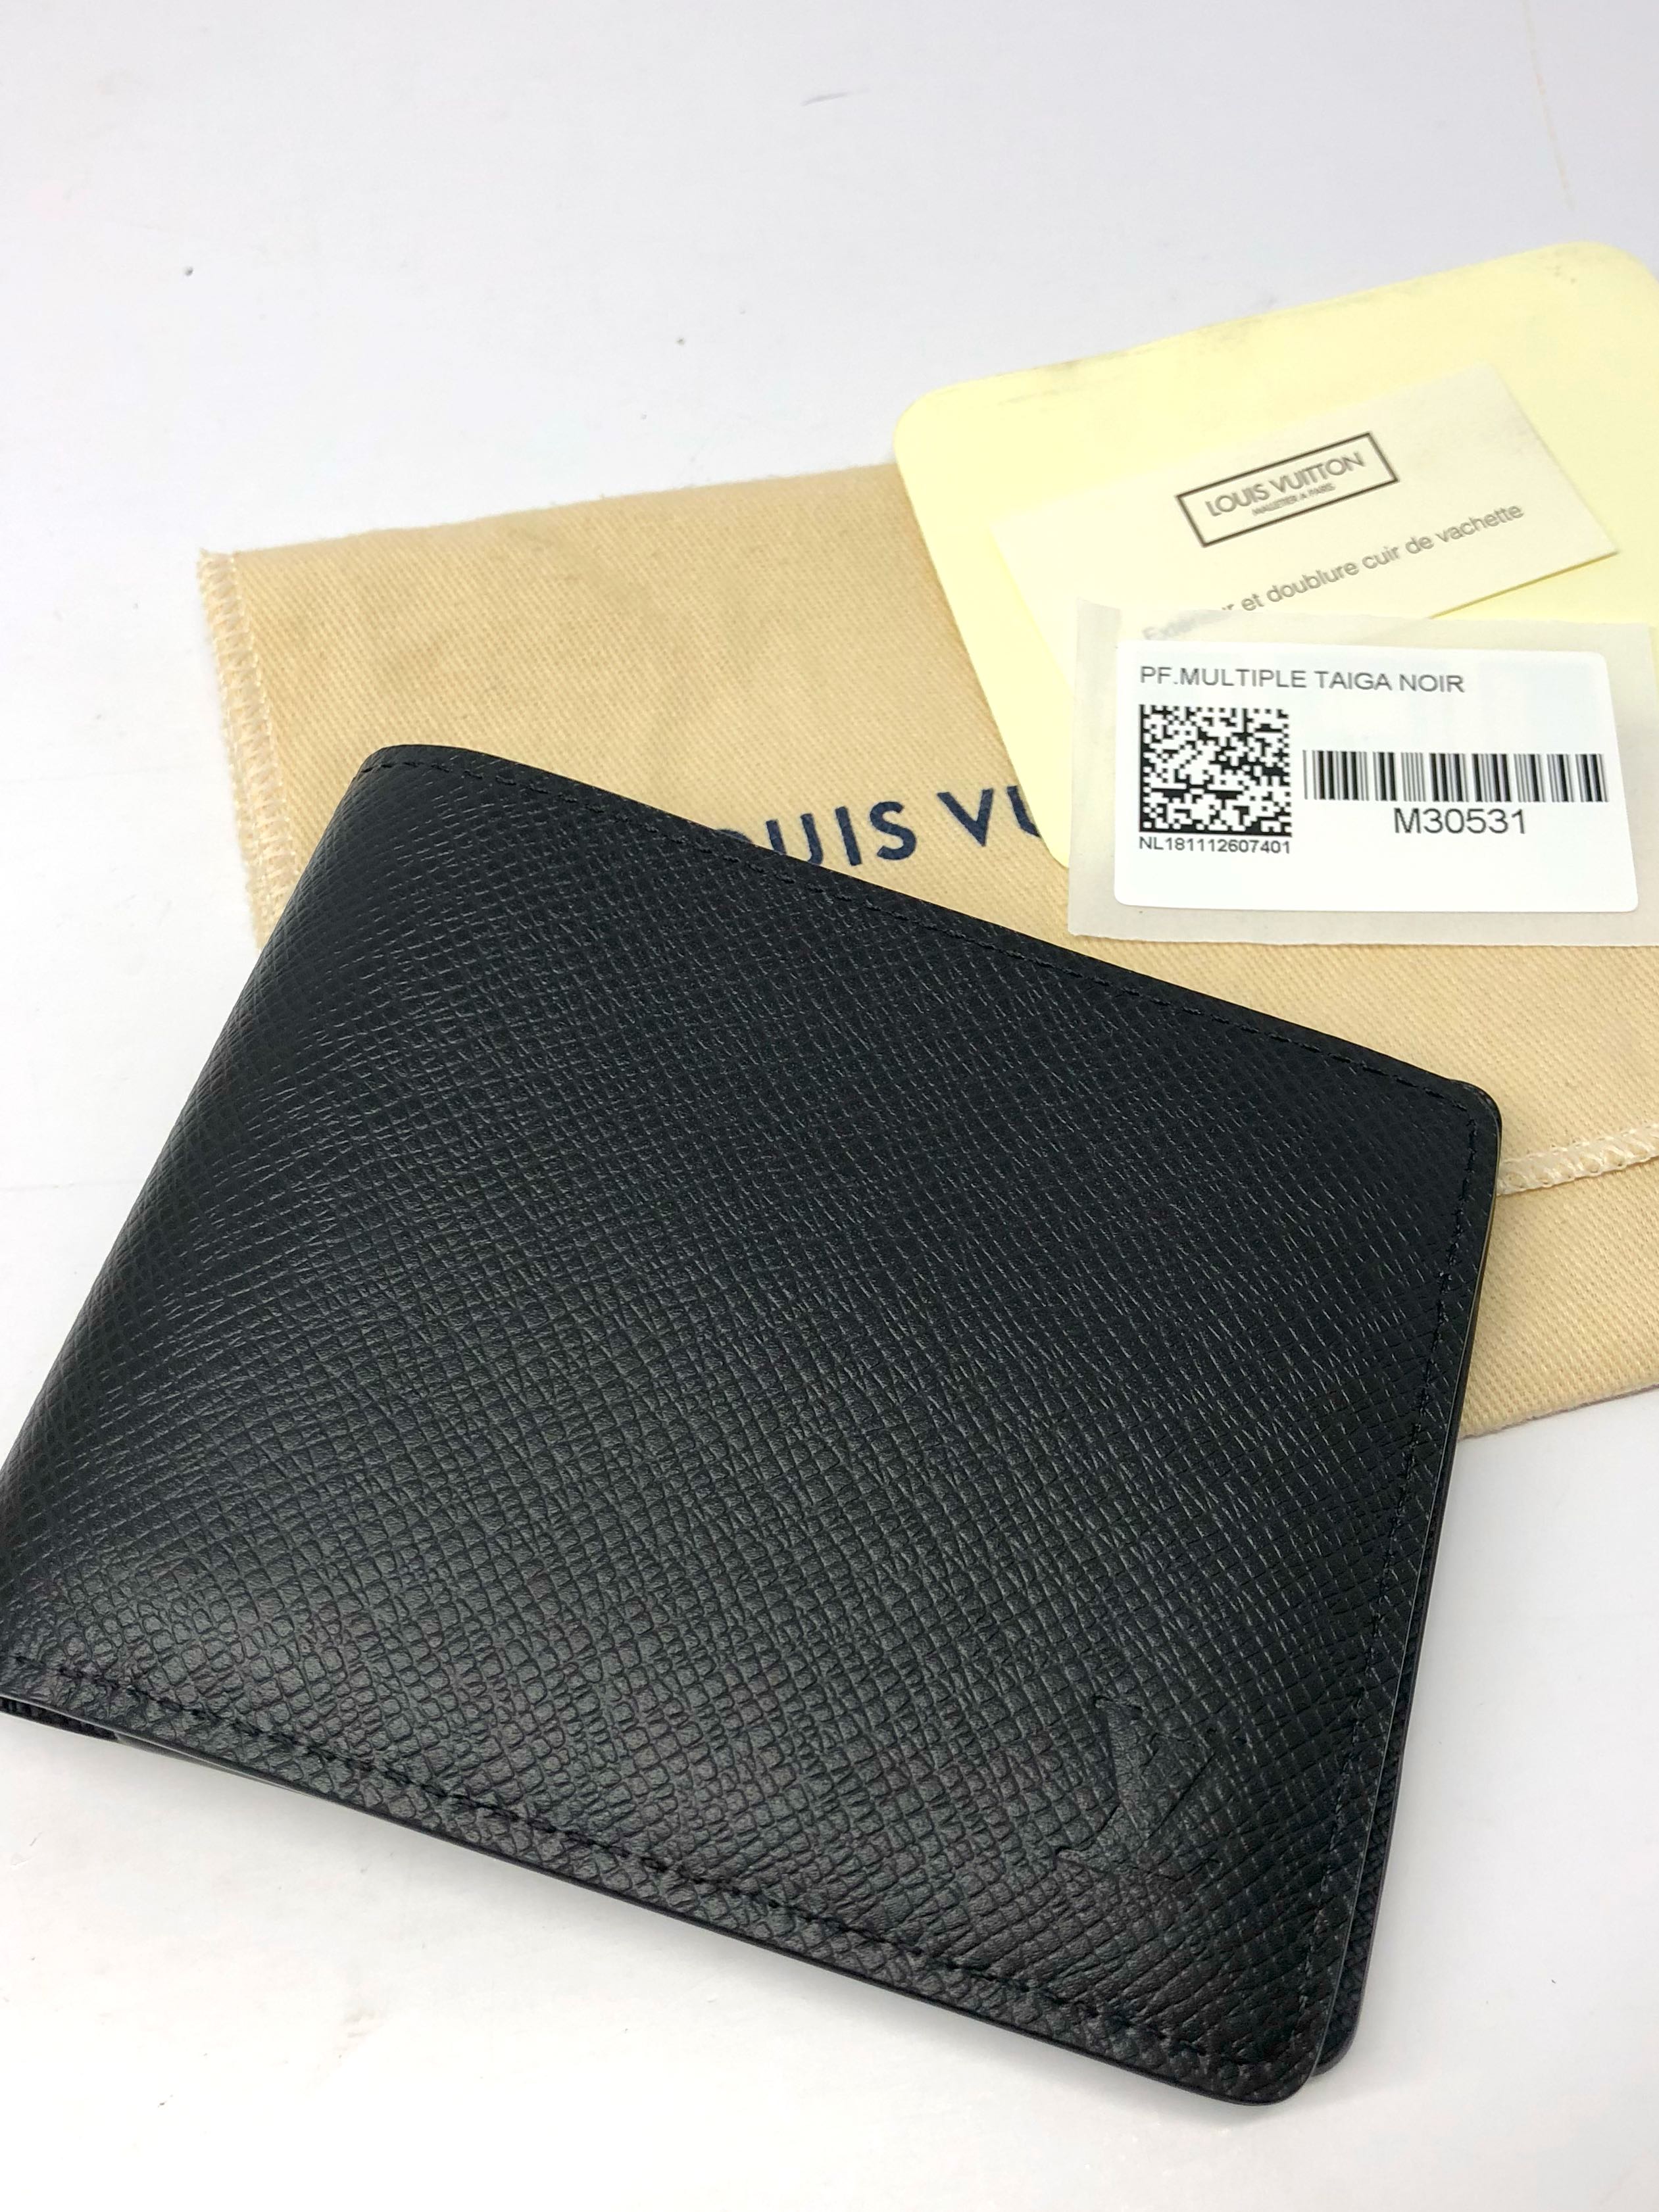 LOUIS VUITTON TAIGA NOIR WALLET M30531 187005787, Men's Fashion, Watches &  Accessories, Wallets & Card Holders on Carousell